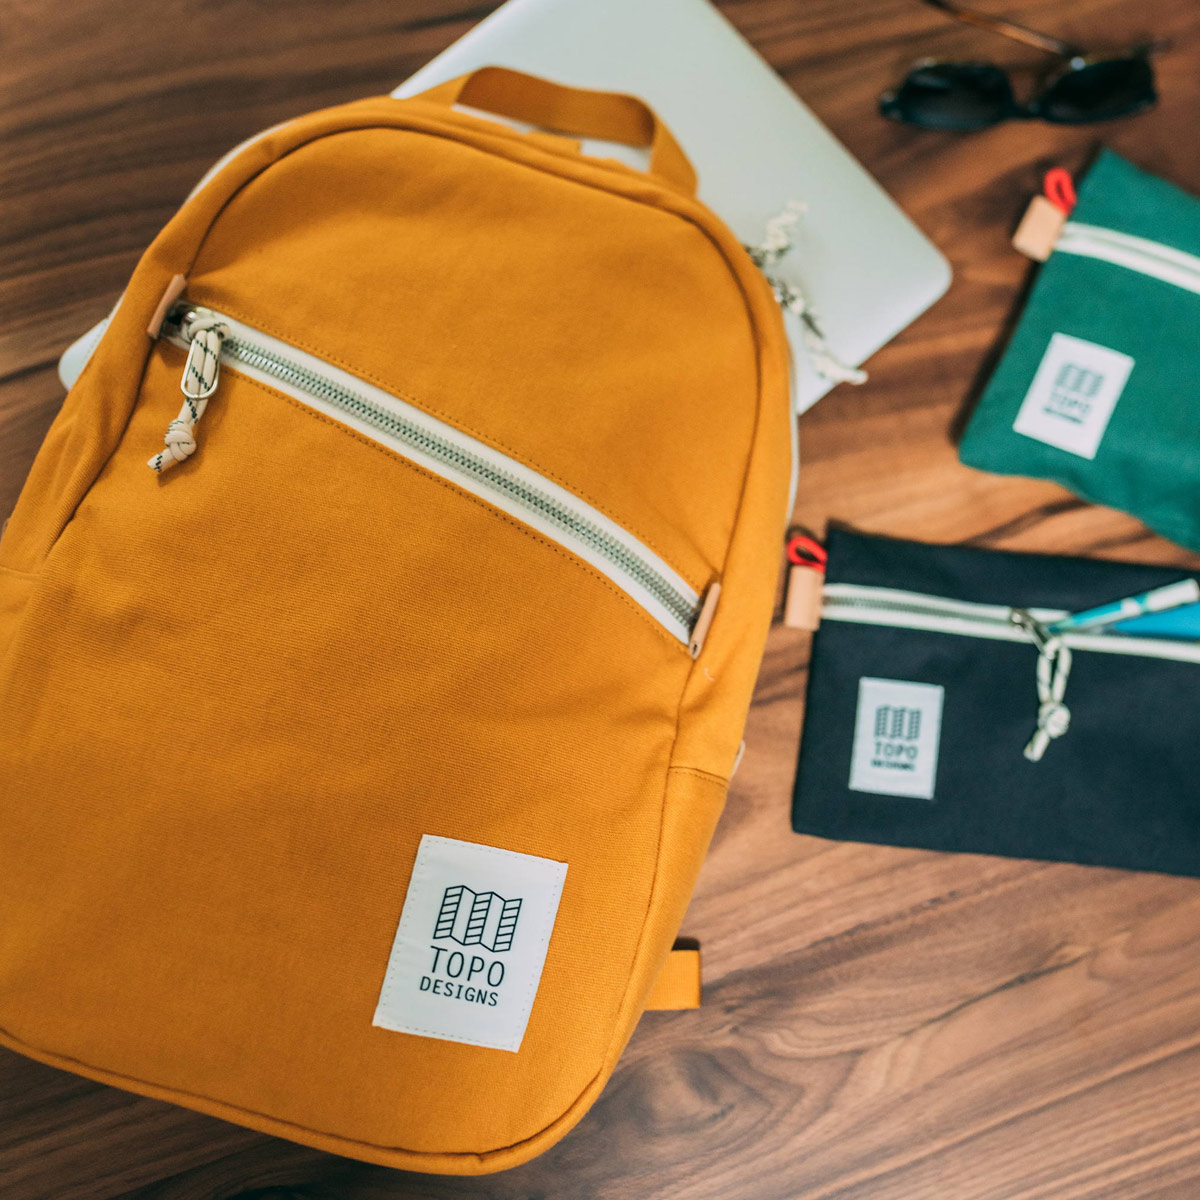 Topo Designs Light Pack Canvas, lightweight carry-all bag, also perfect pack for hiking